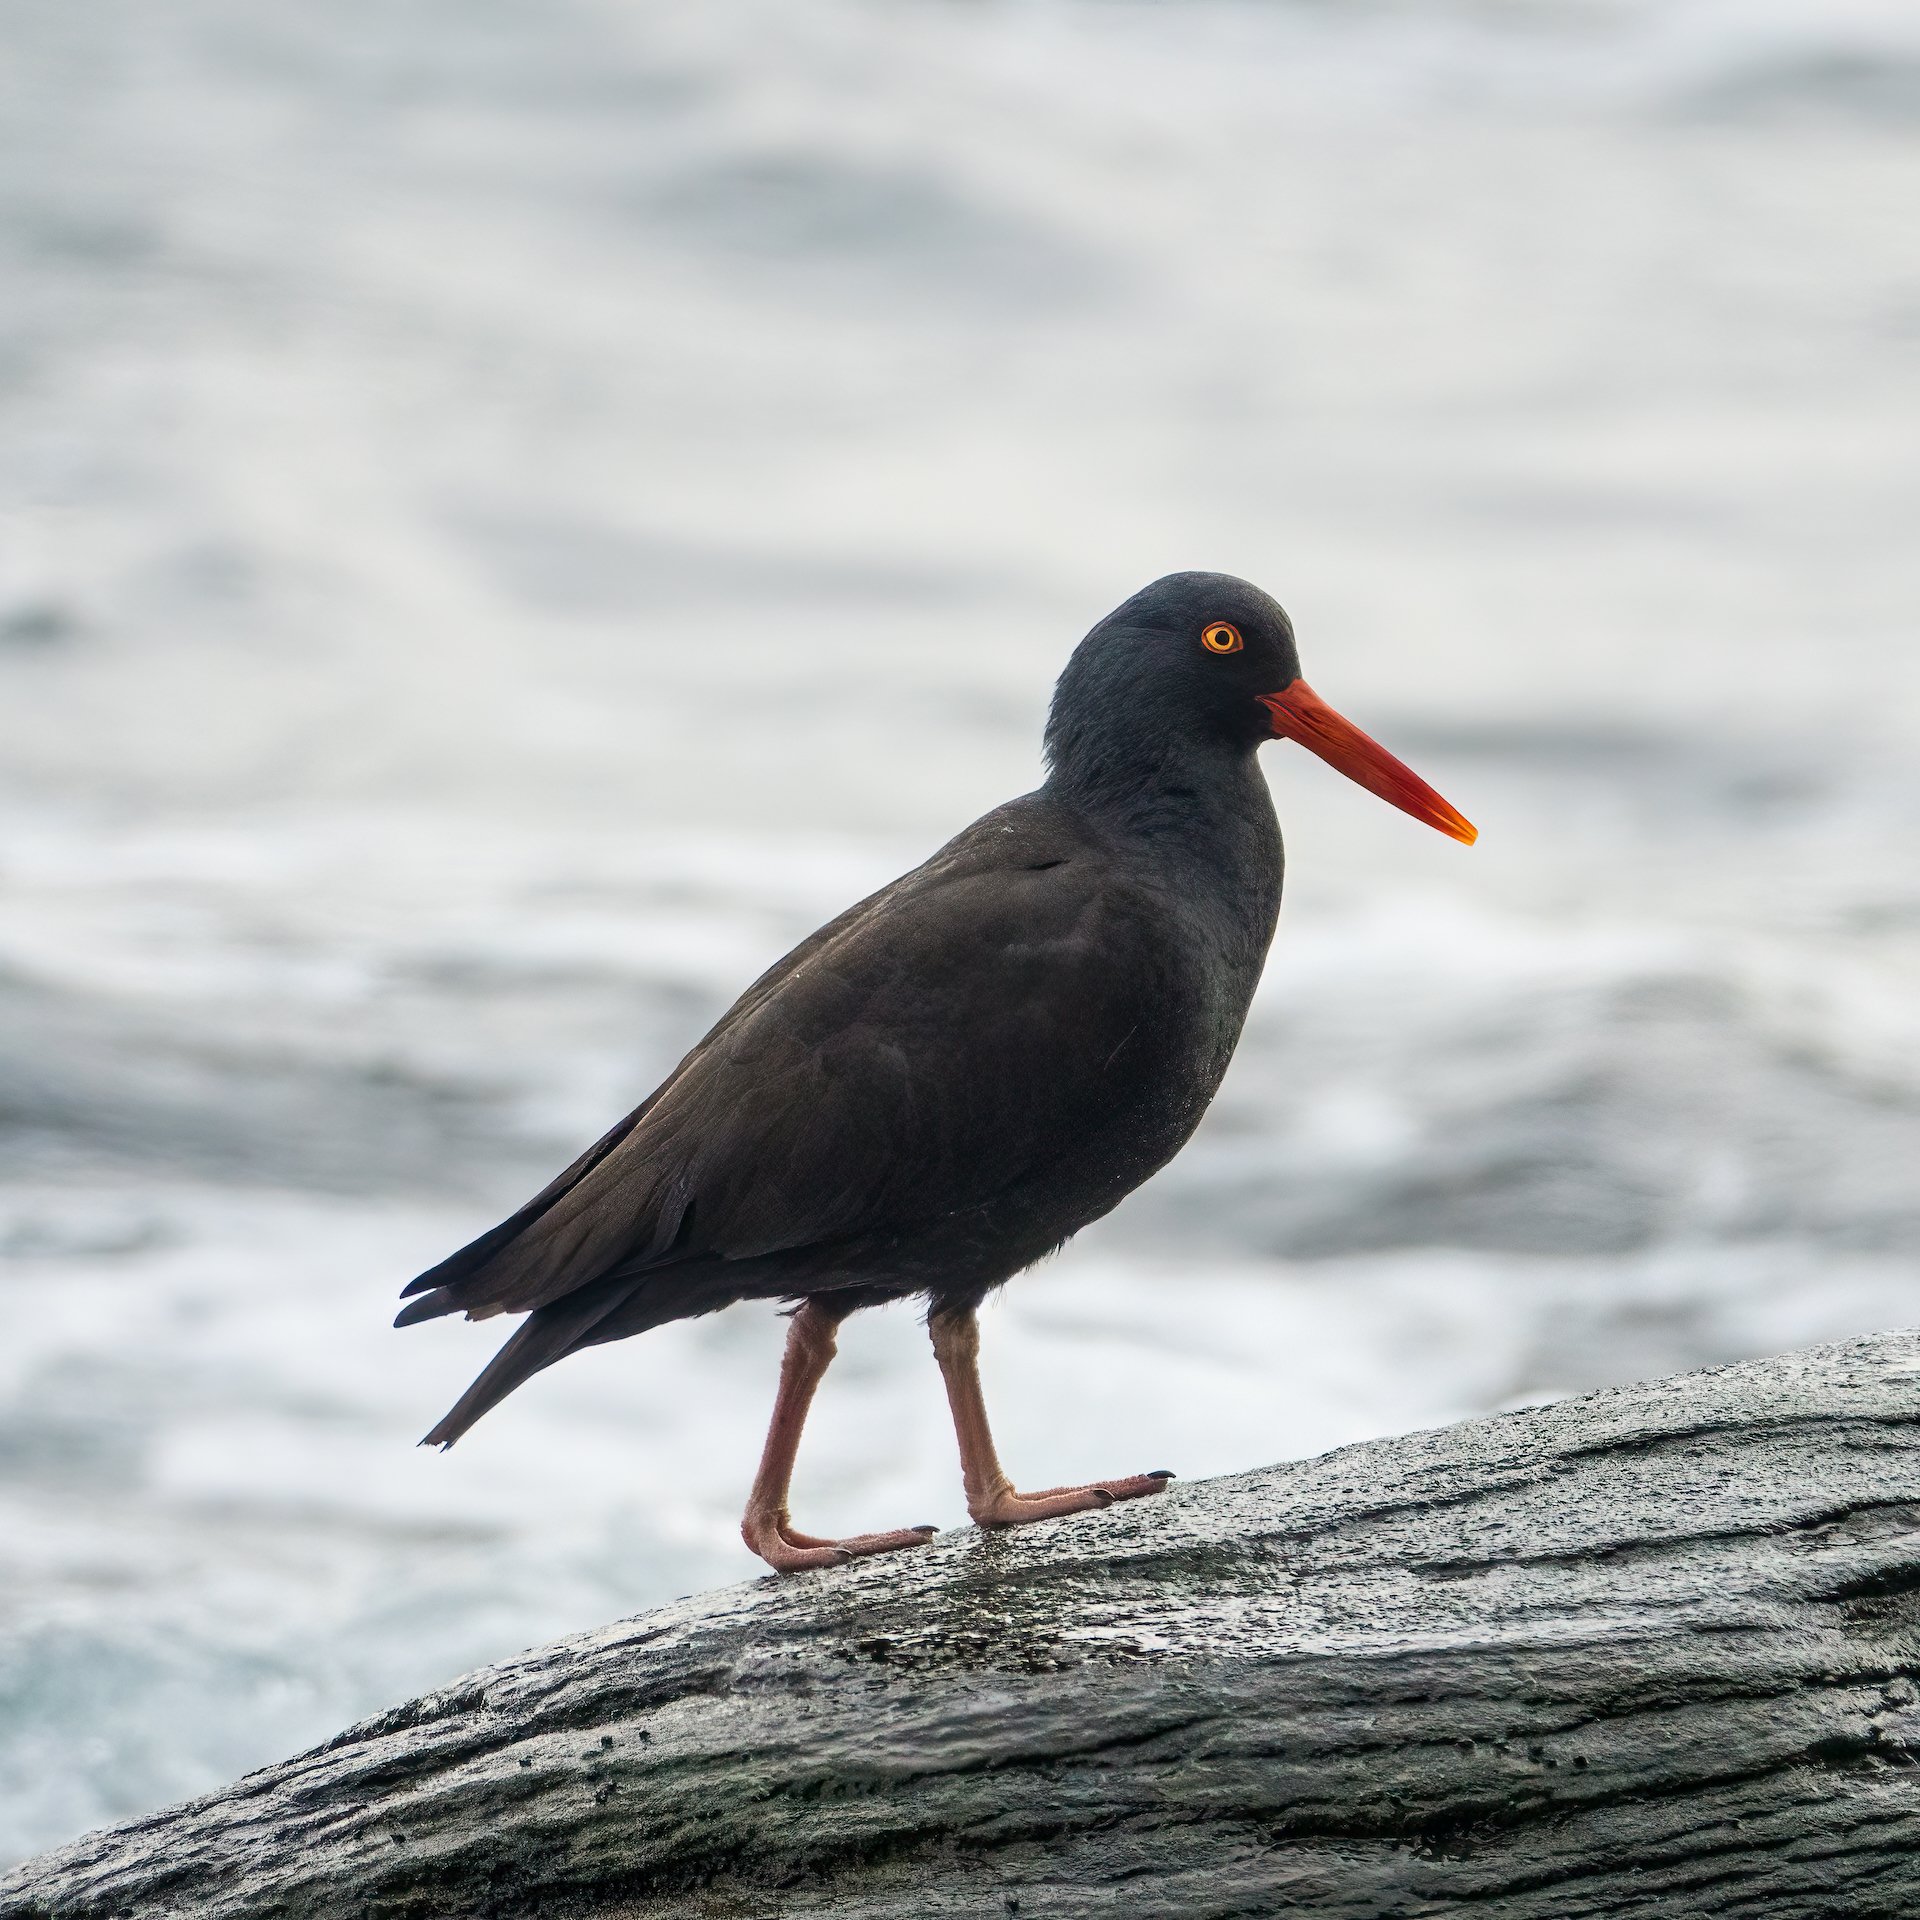  When I got down to the beach, there was a small flock of black oystercatchers. 